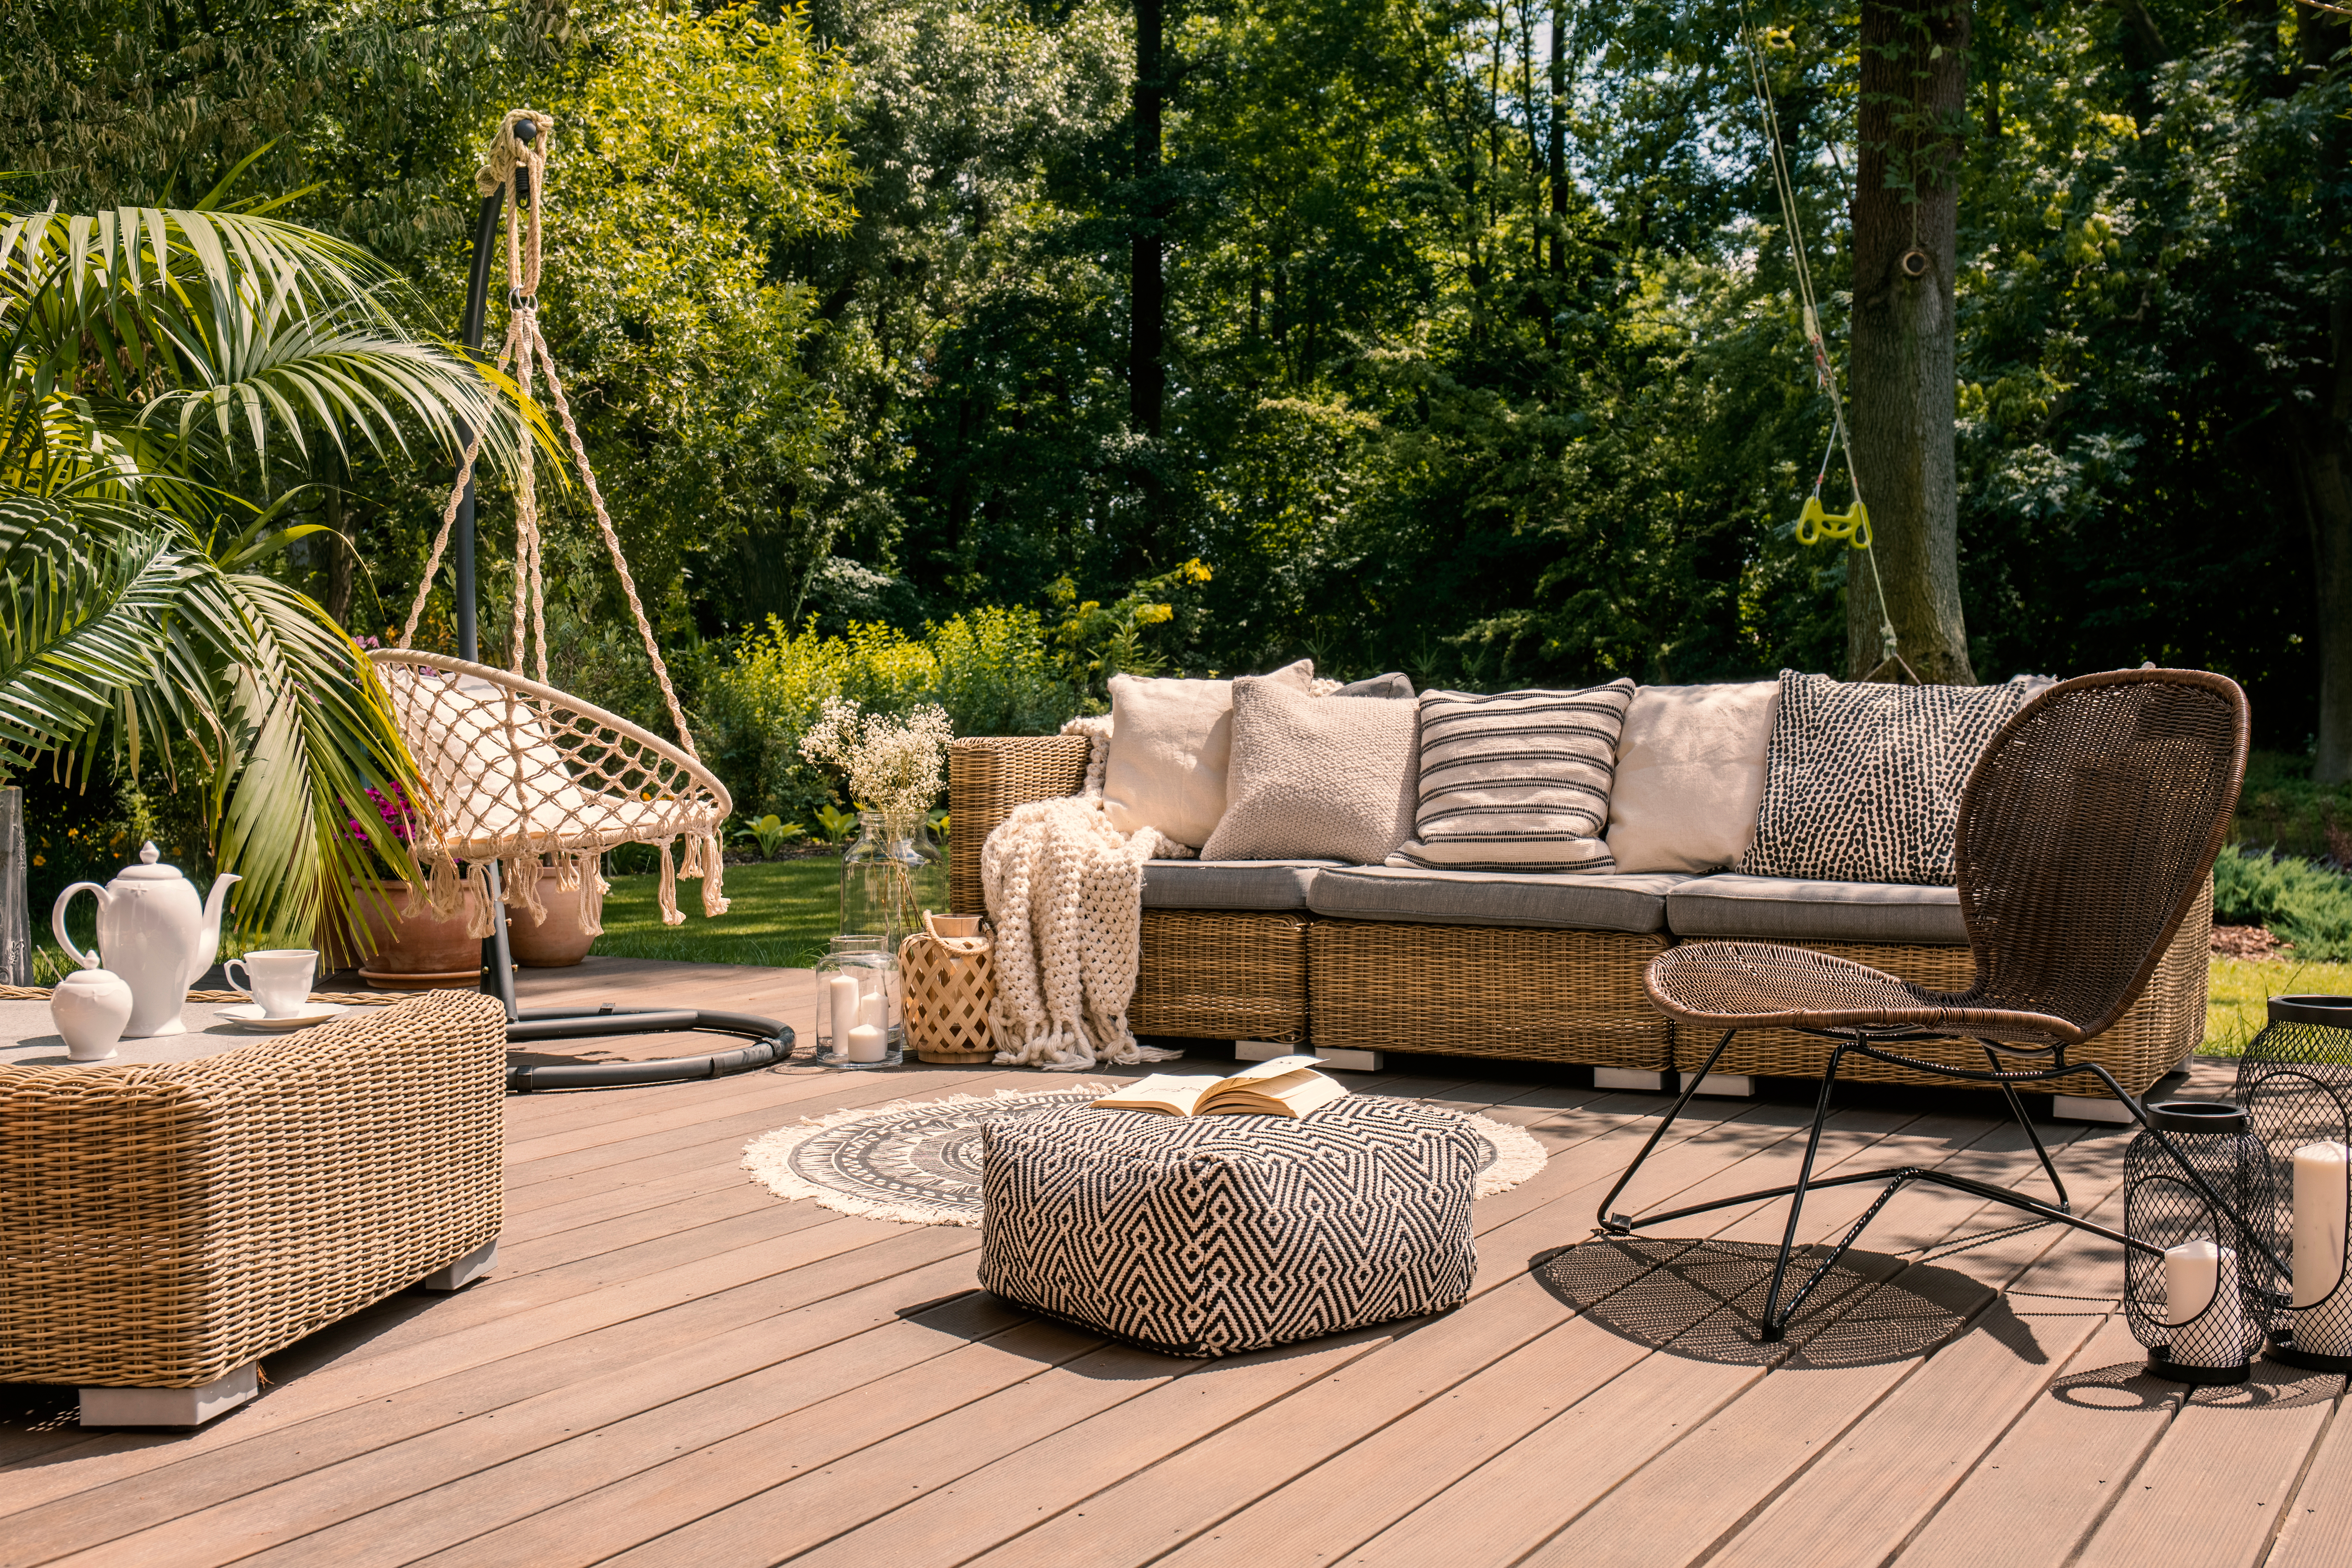 A patio with rattan and wood features. | Source: Shutterstock